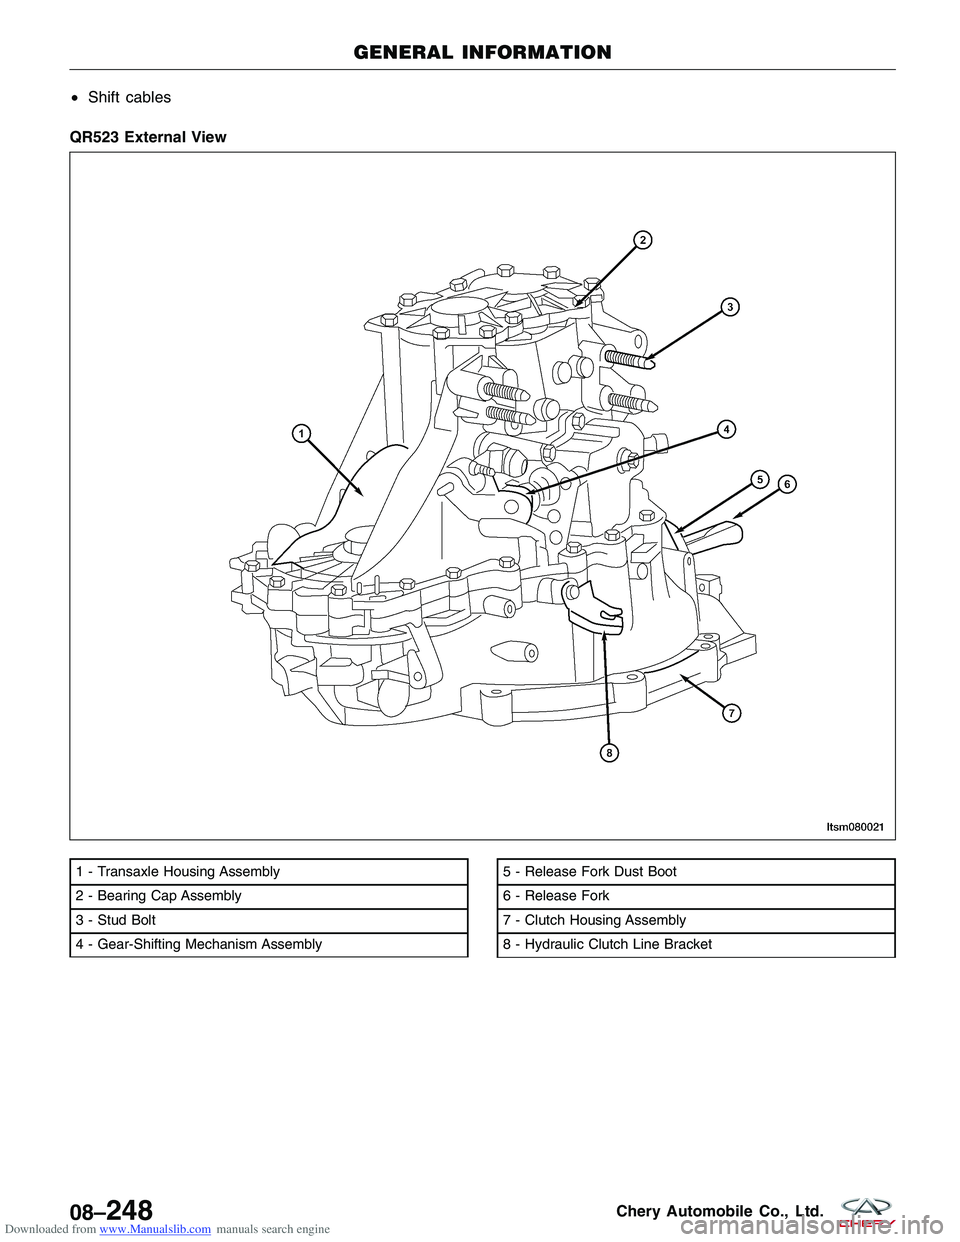 CHERY TIGGO 2009  Service Repair Manual Downloaded from www.Manualslib.com manuals search engine •Shift cables
QR523 External View
1 - Transaxle Housing Assembly
2 - Bearing Cap Assembly
3 - Stud Bolt
4 - Gear-Shifting Mechanism Assembly5